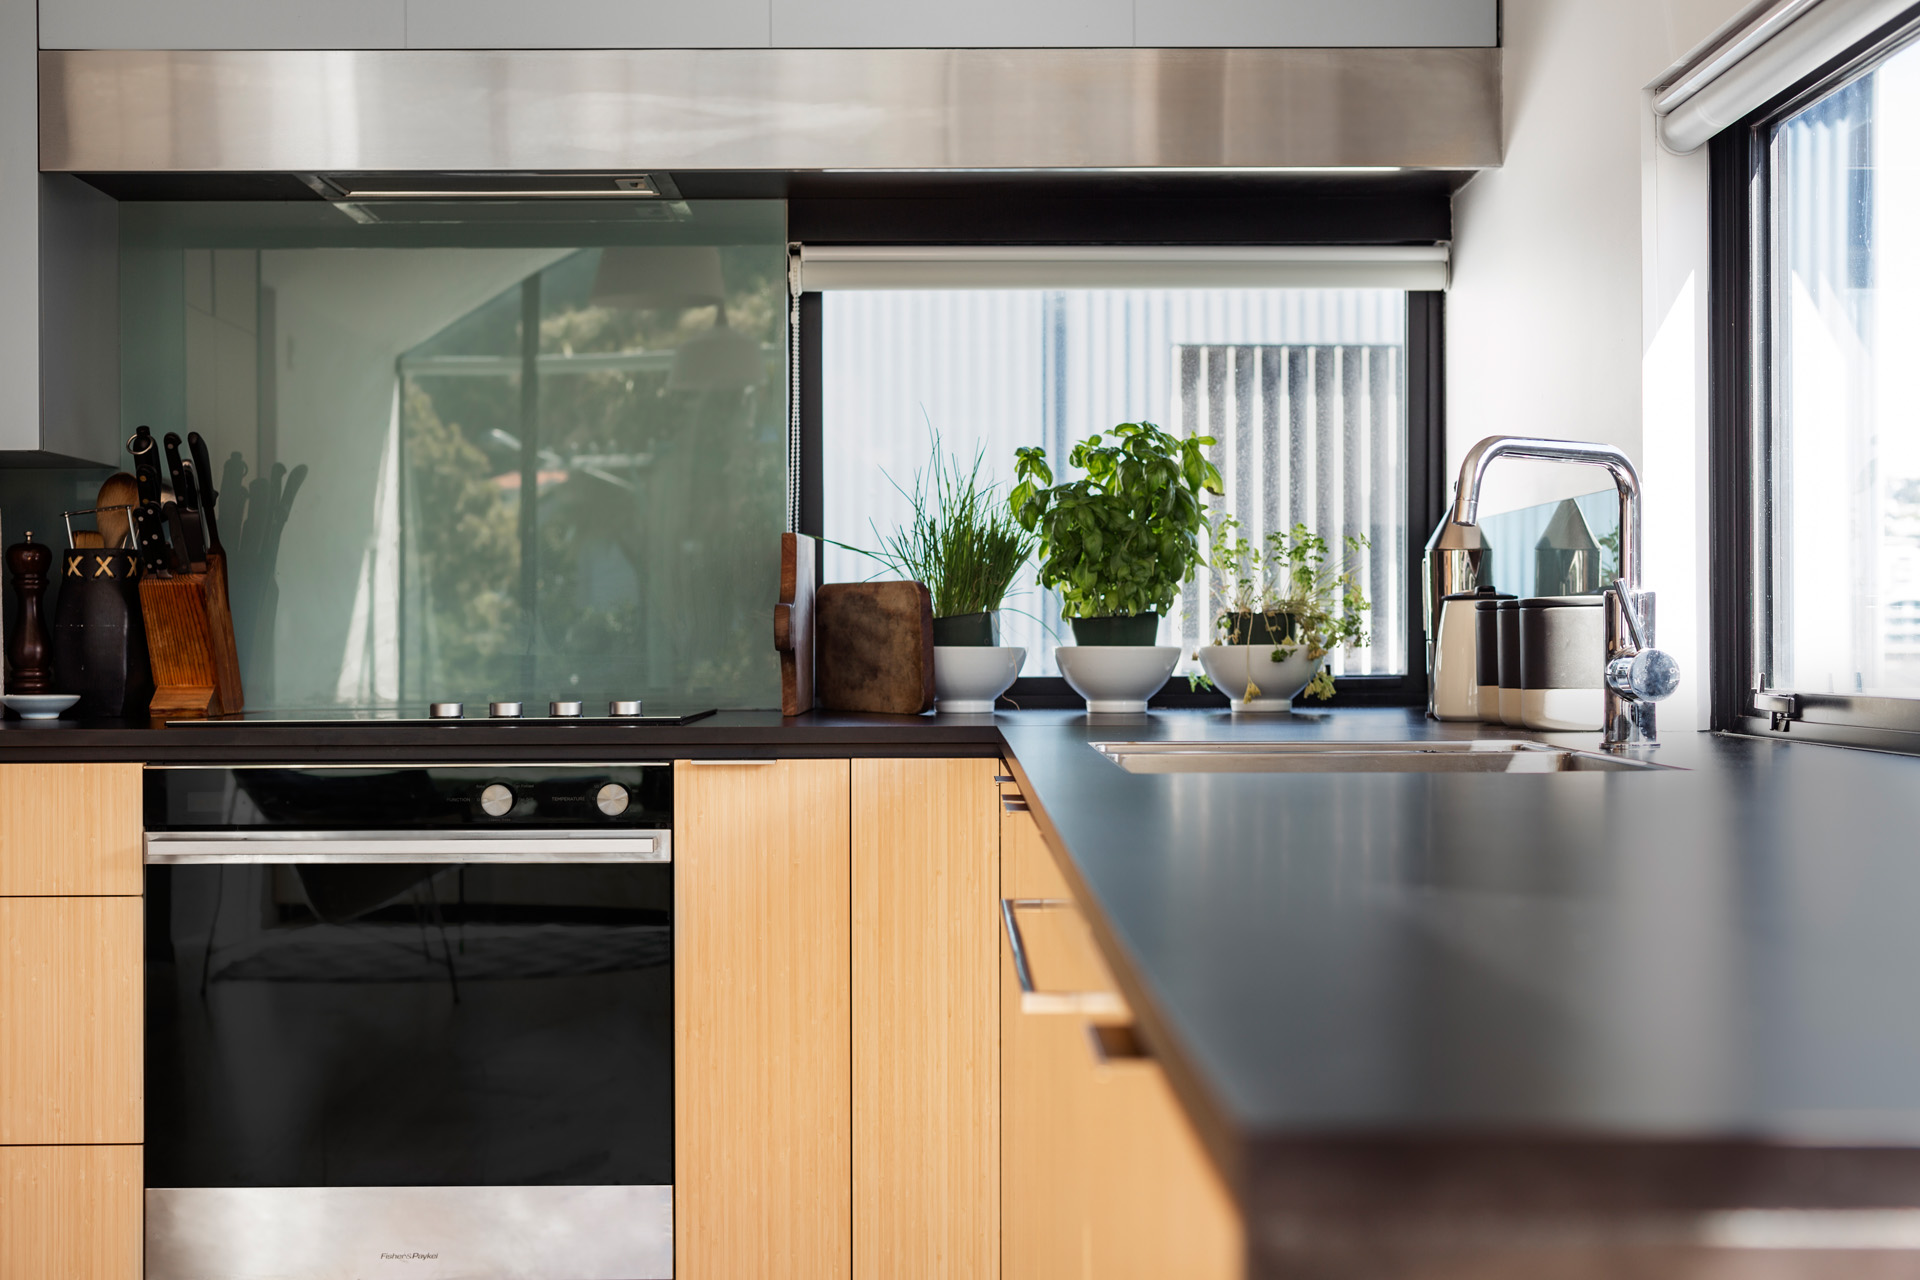 Another of the apartment kitchens, featuring appliances by Fisher & Paykel.